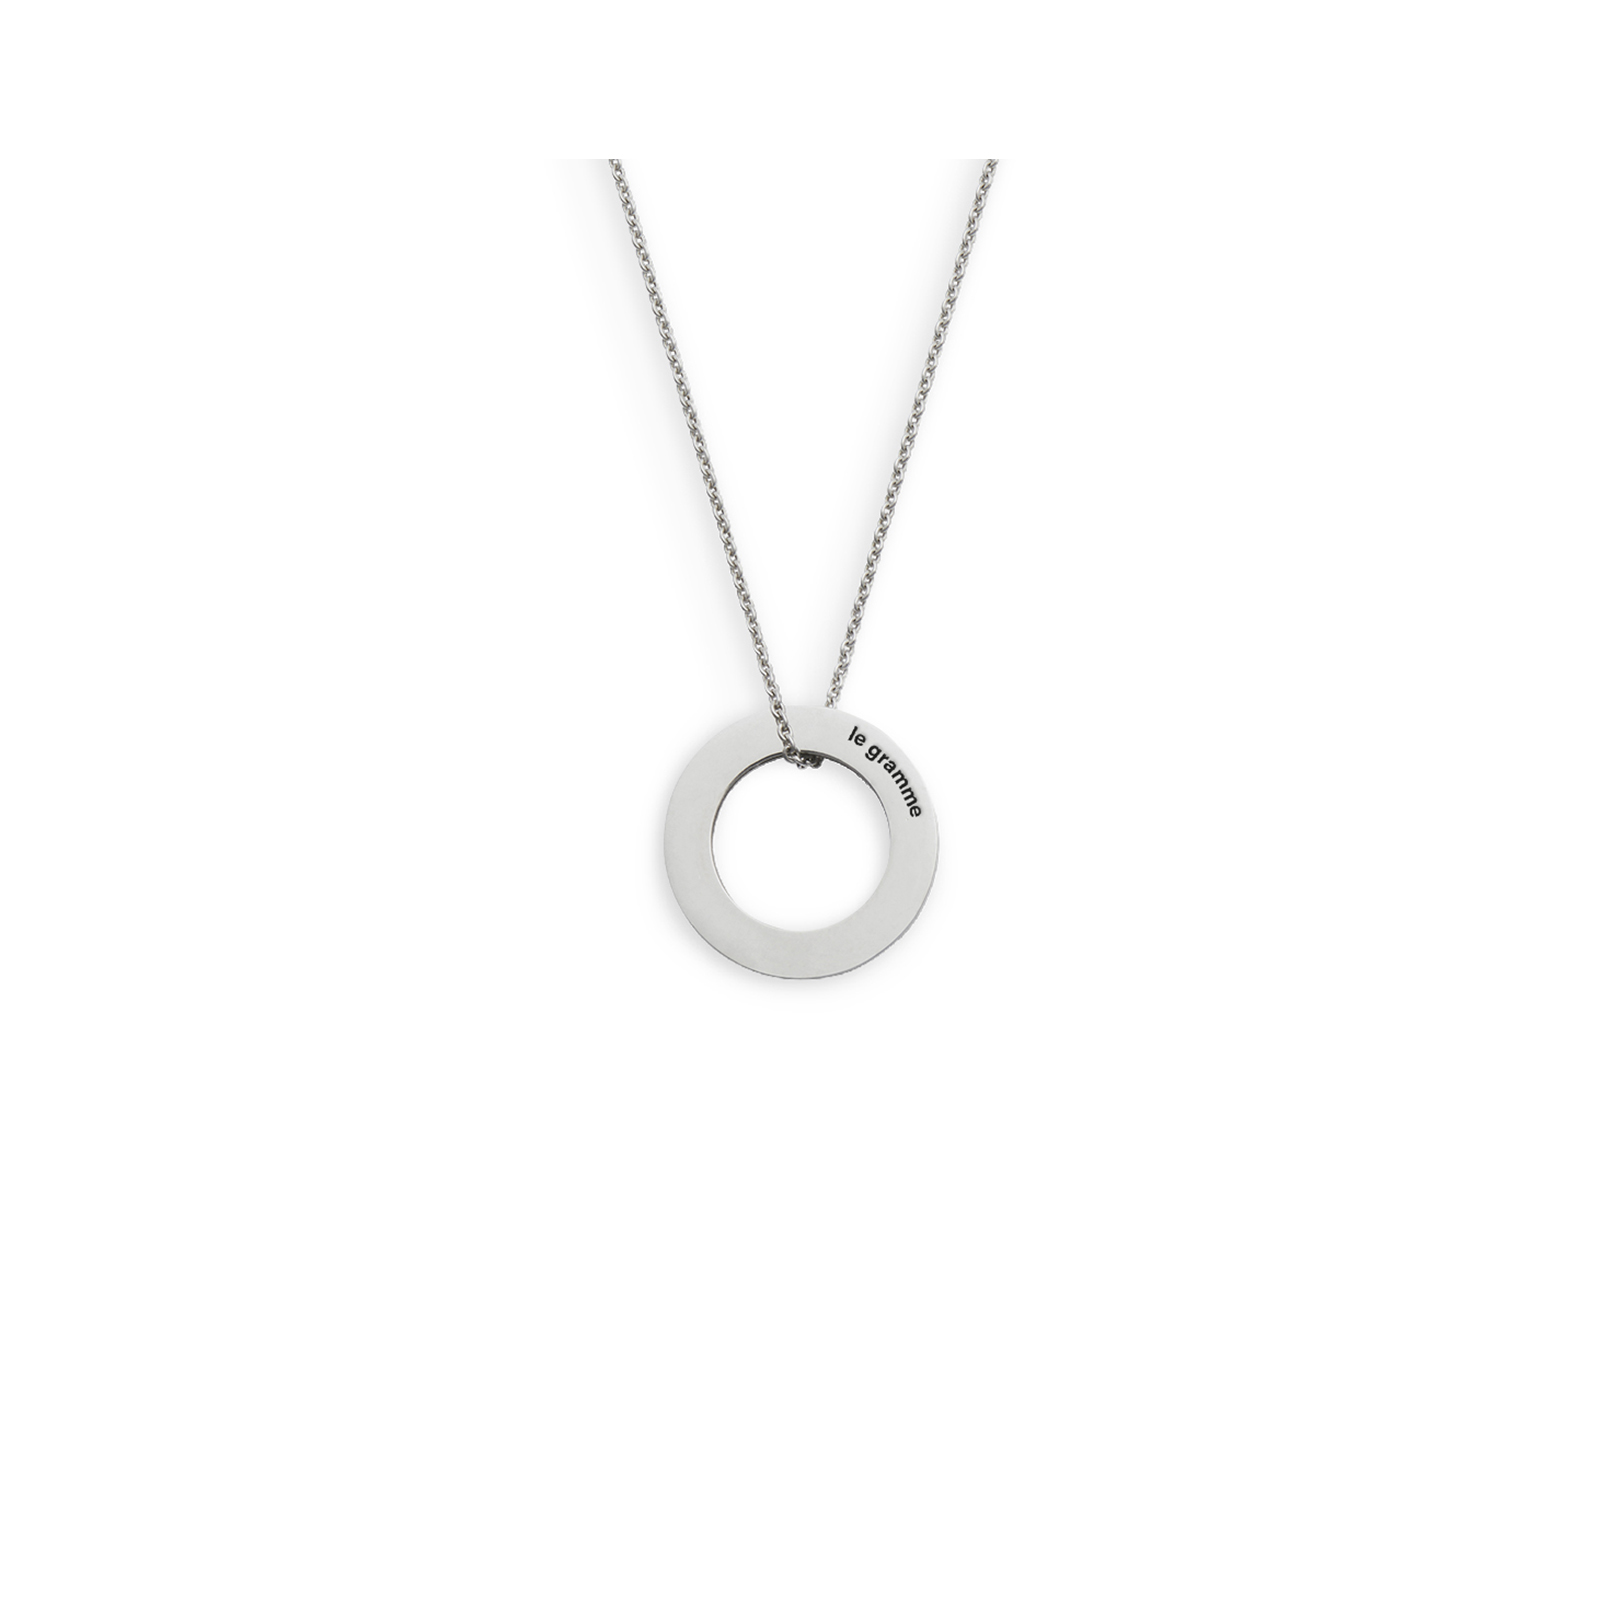 2,5g round pendant with a chain